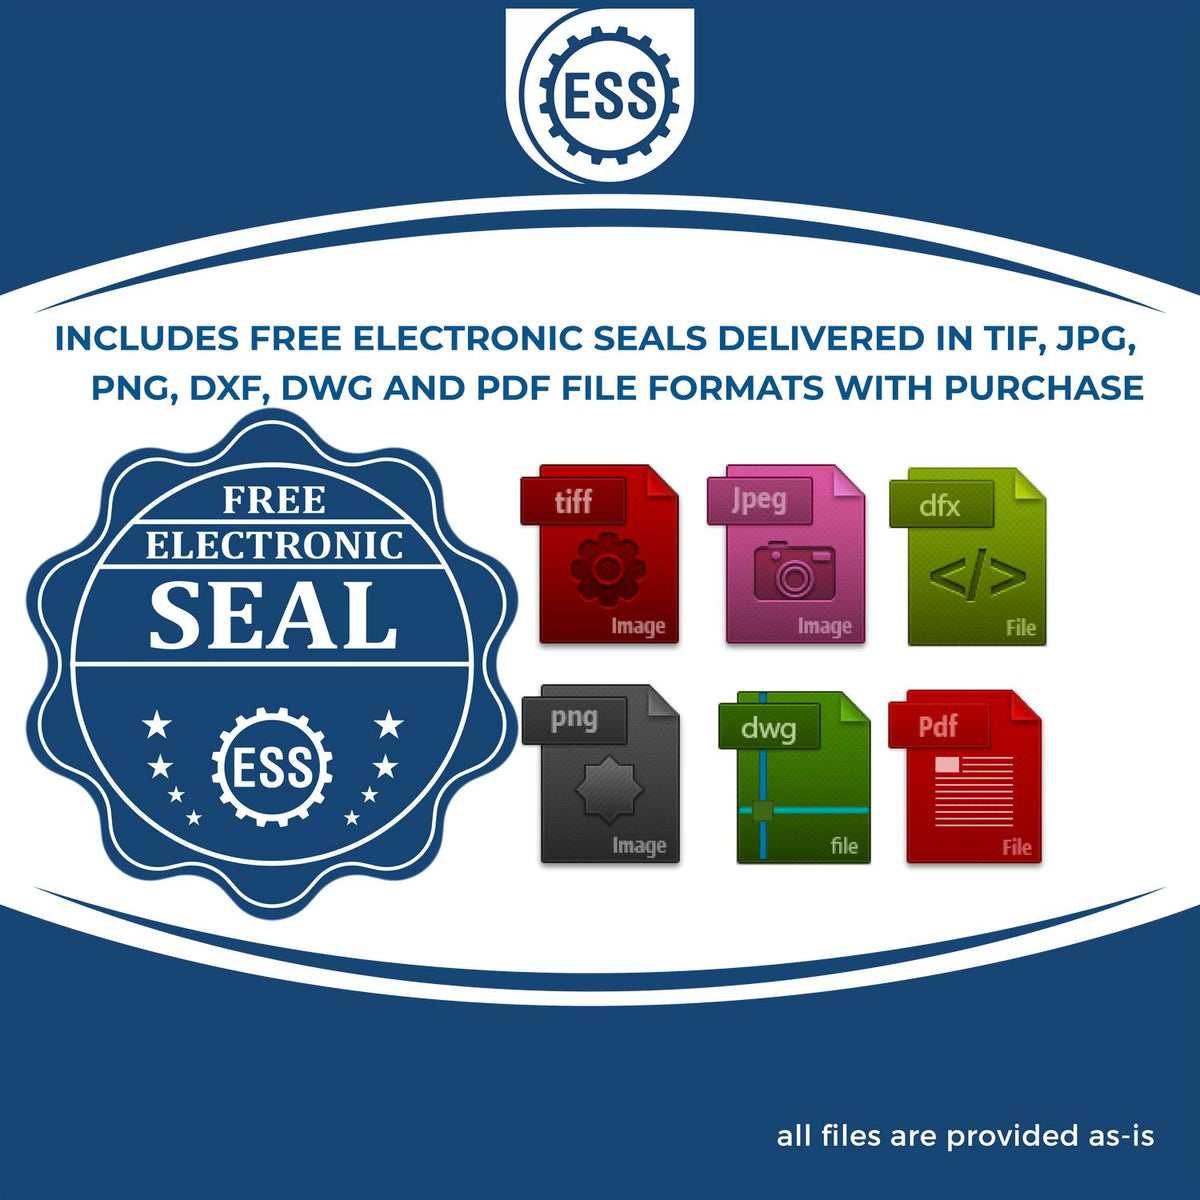 An infographic for the free electronic seal for the New Hampshire Professional Geologist Seal Stamp illustrating the different file type icons such as DXF, DWG, TIF, JPG and PNG.